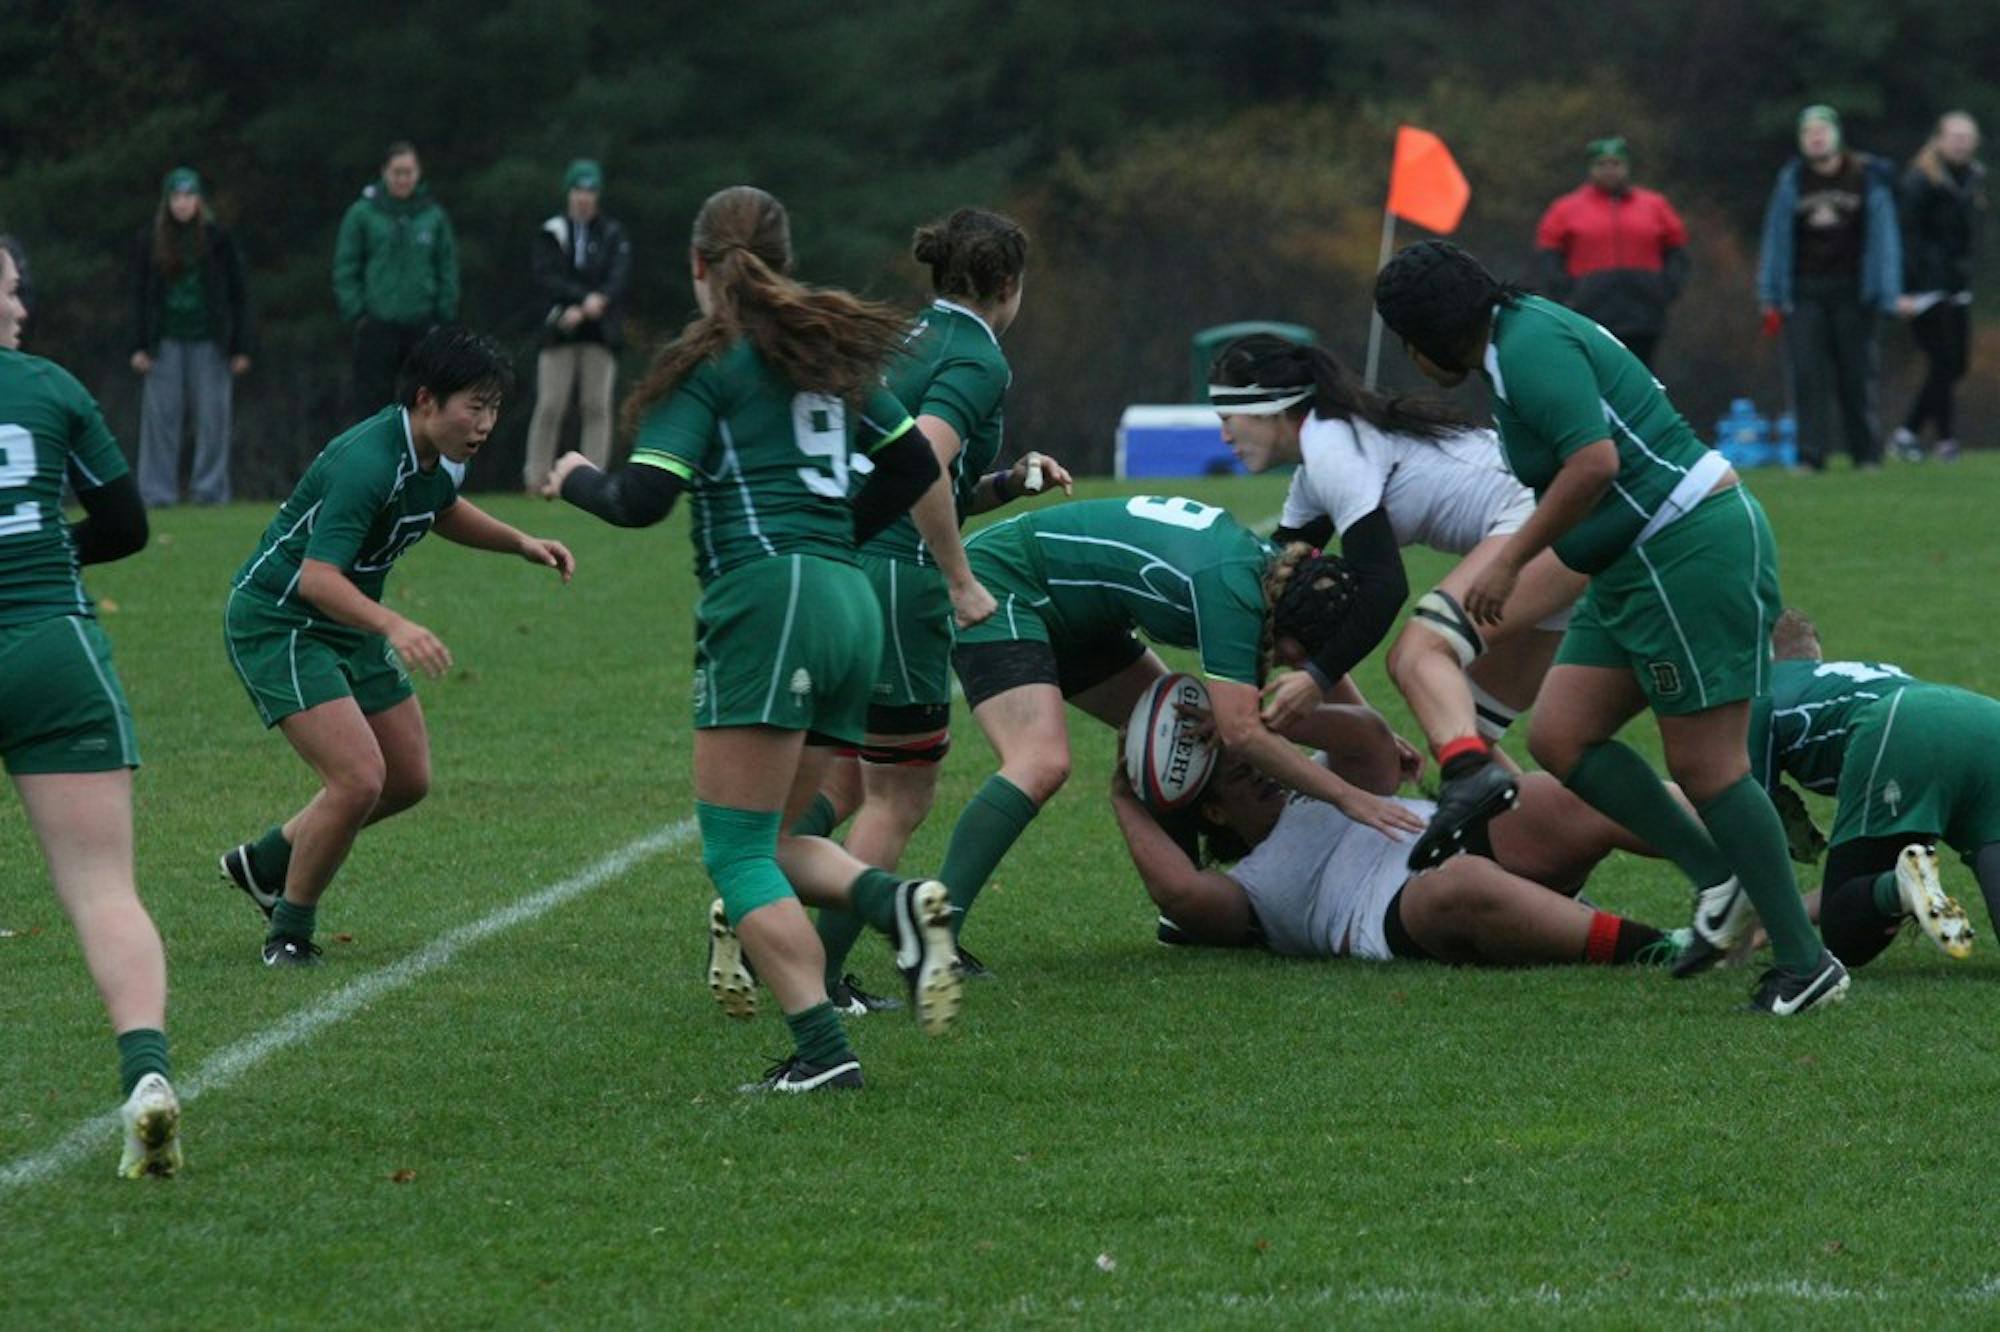 The Women's Rugby team competes for the Ivy League Championship this Sunday.